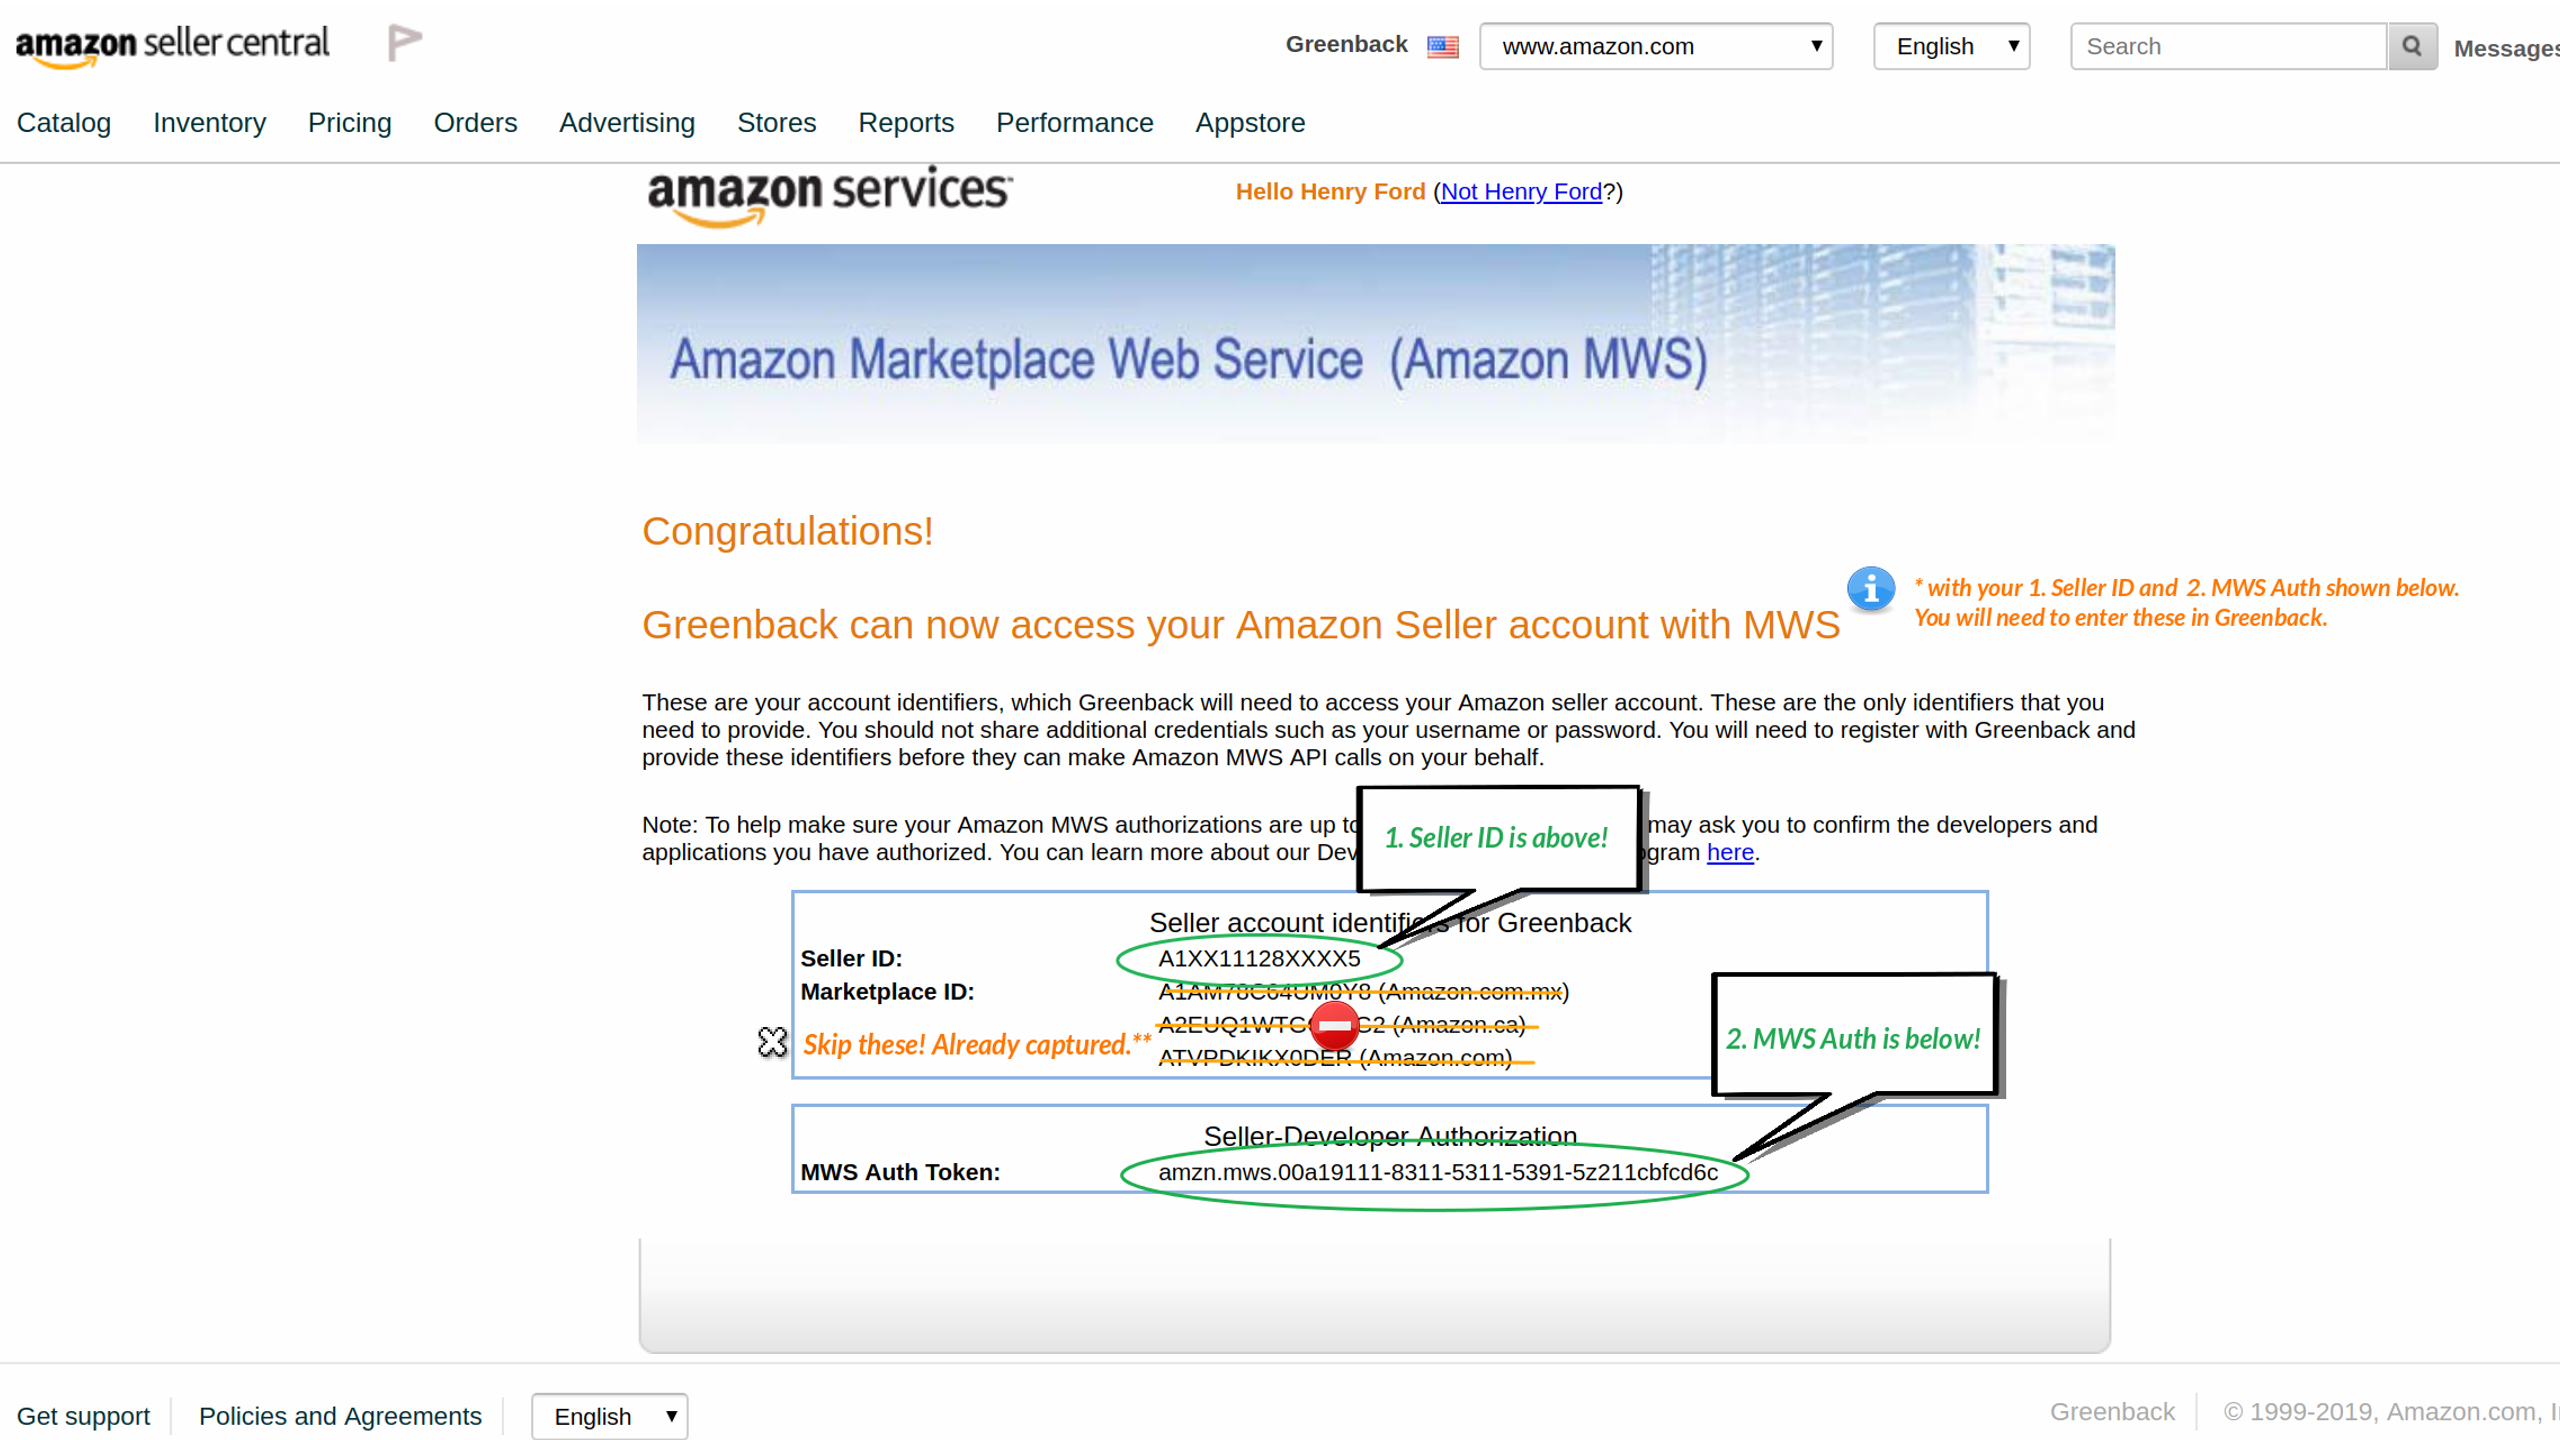 Locate Amazon Seller ID and MWS Auth Token to add Greenback access